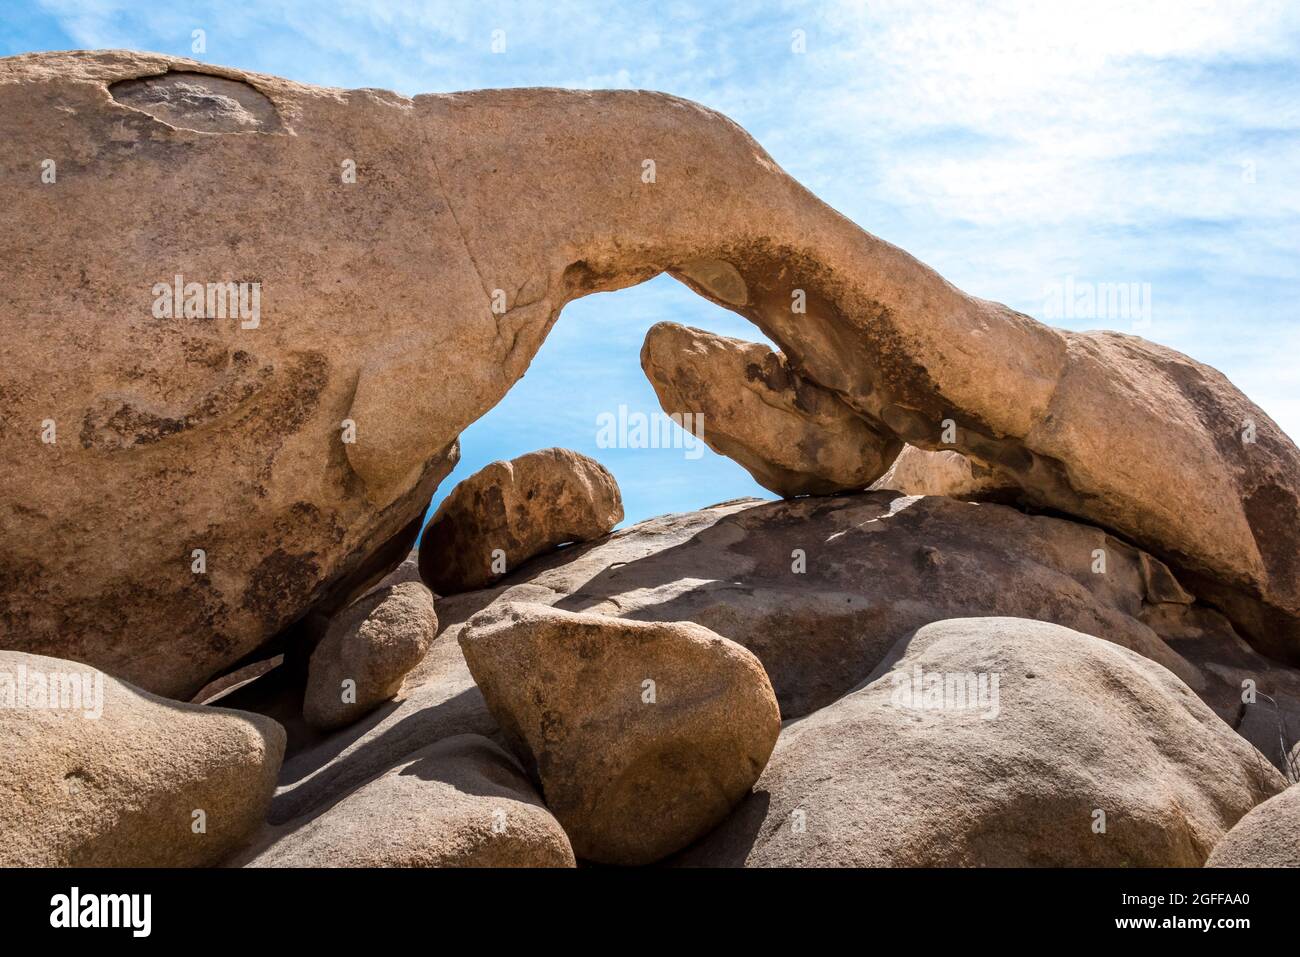 Arch Rock without tourists. This is one of the most popular easy hiking trails and most photographed landmarks in Joshua Tree National Park. Stock Photo